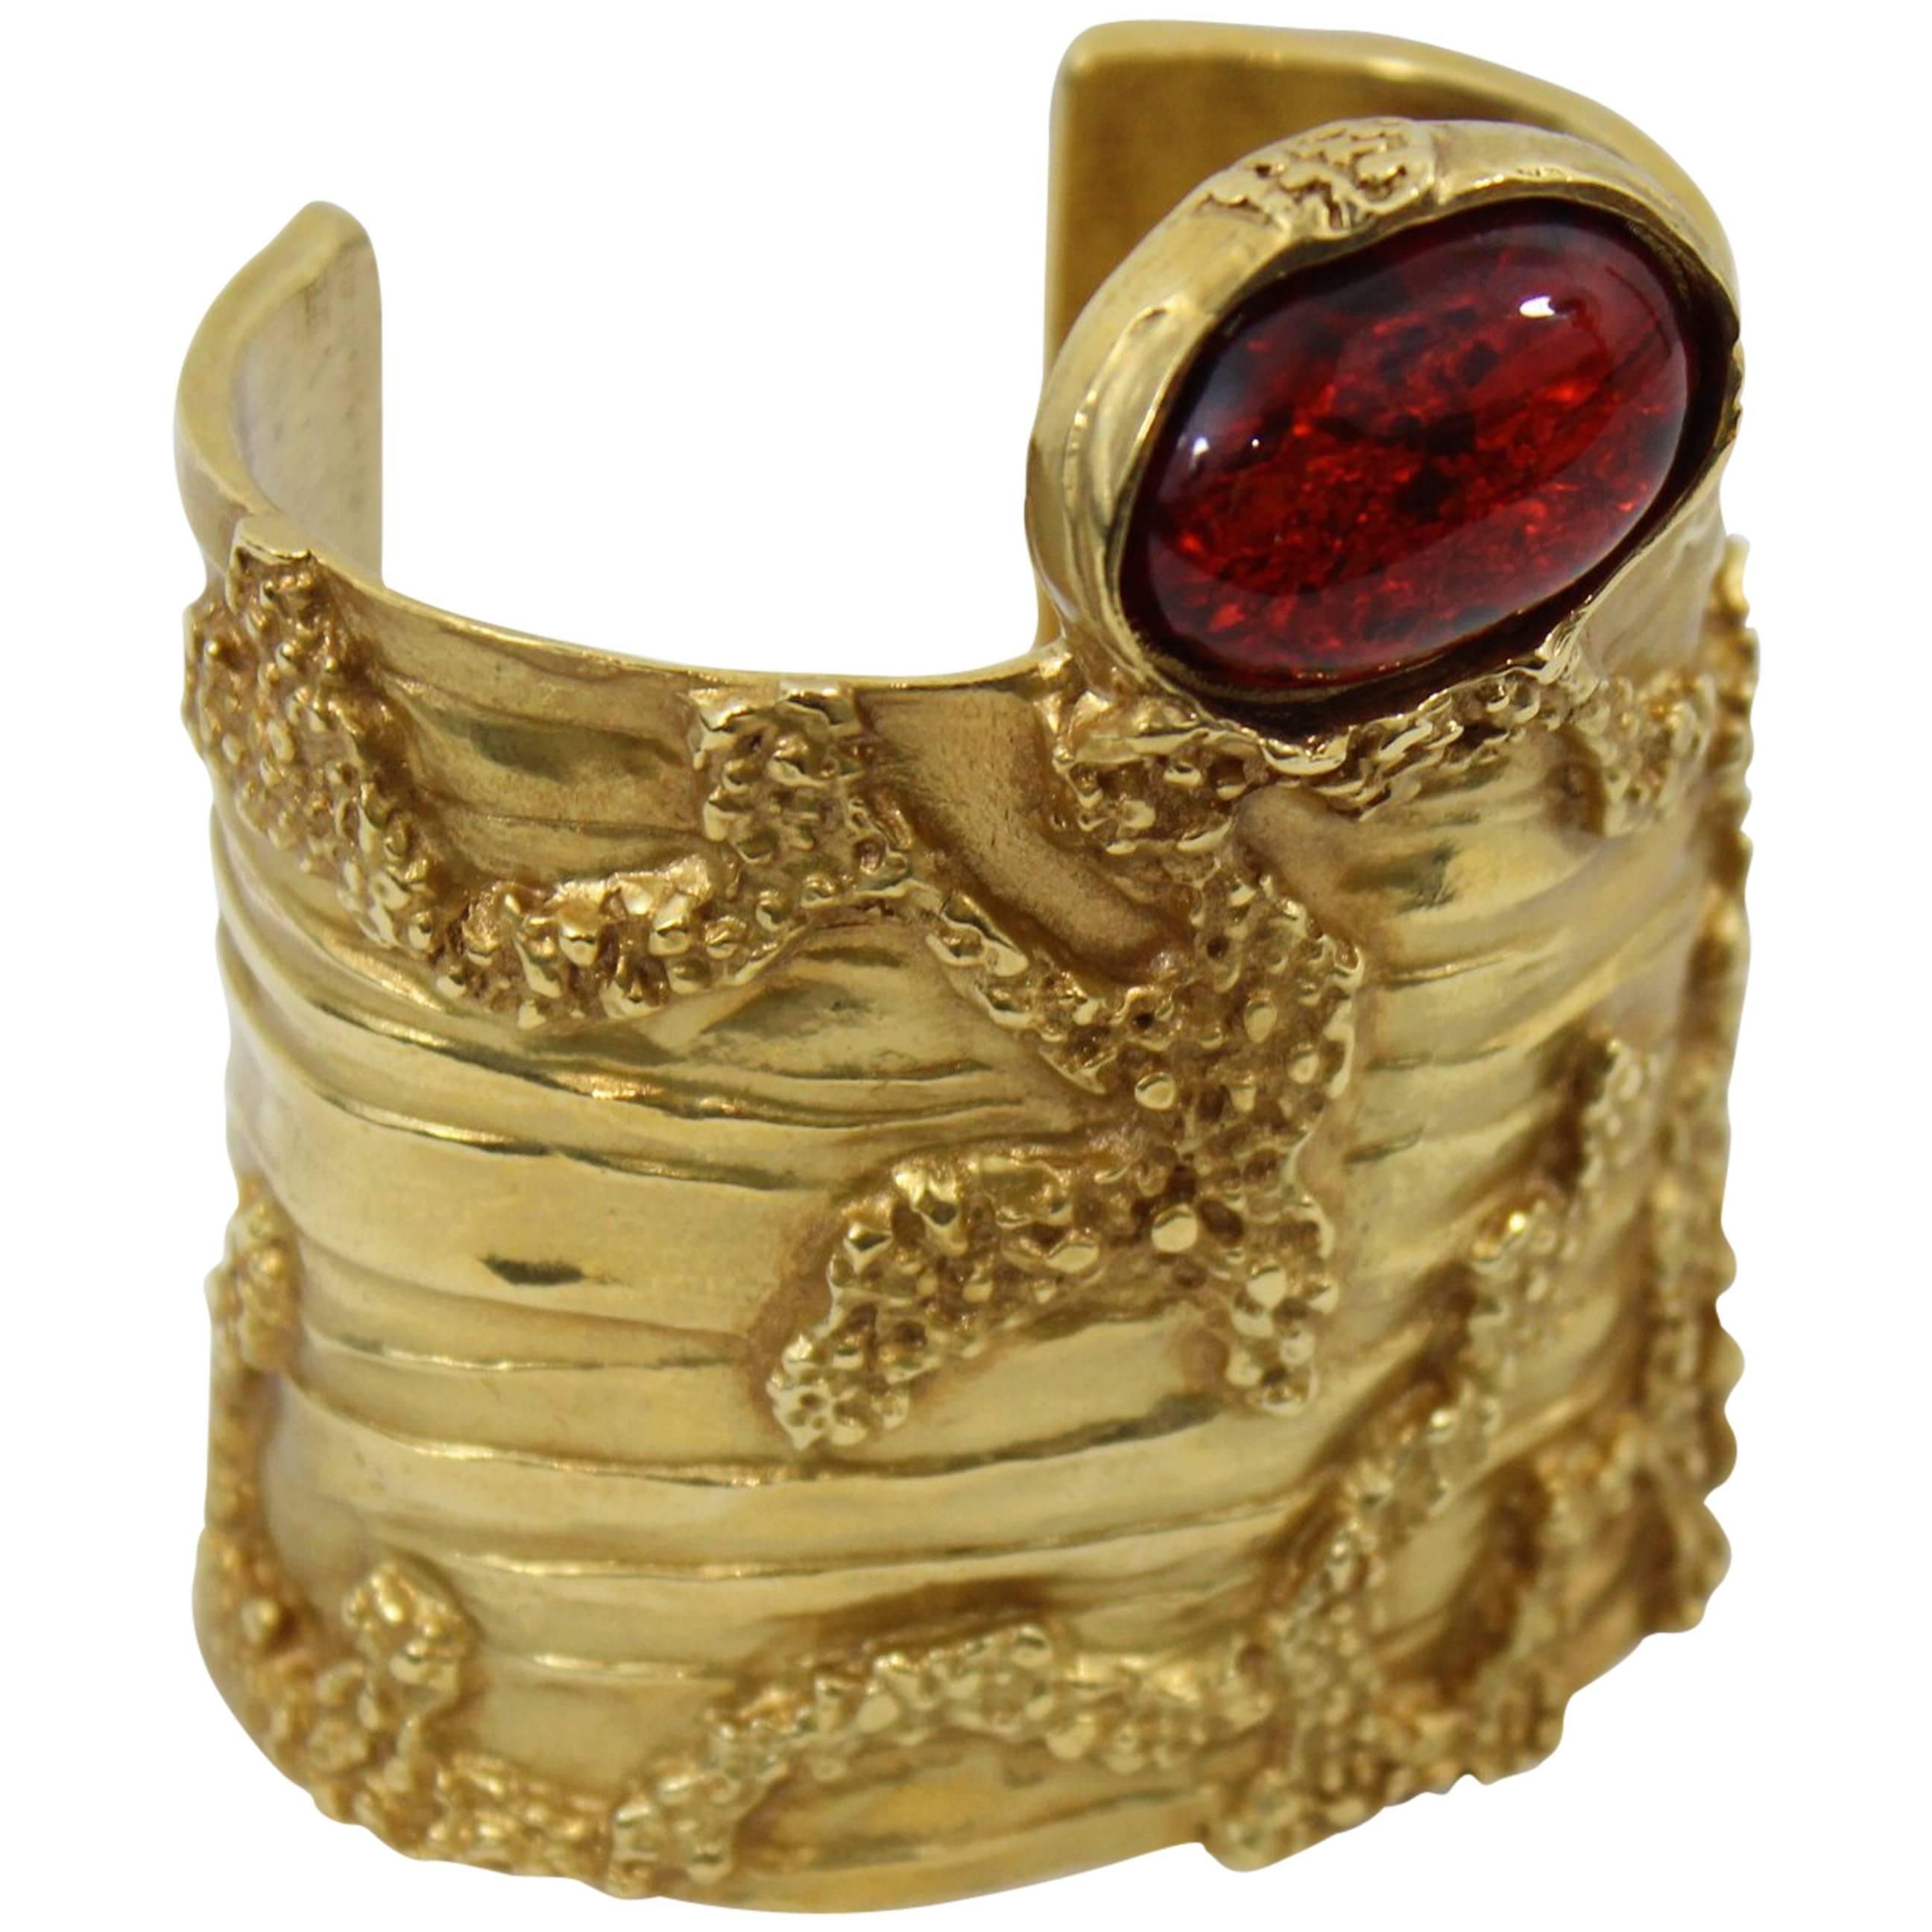 Yves Saint Laurent Gold Plated Artsy Cuff with Red Stone